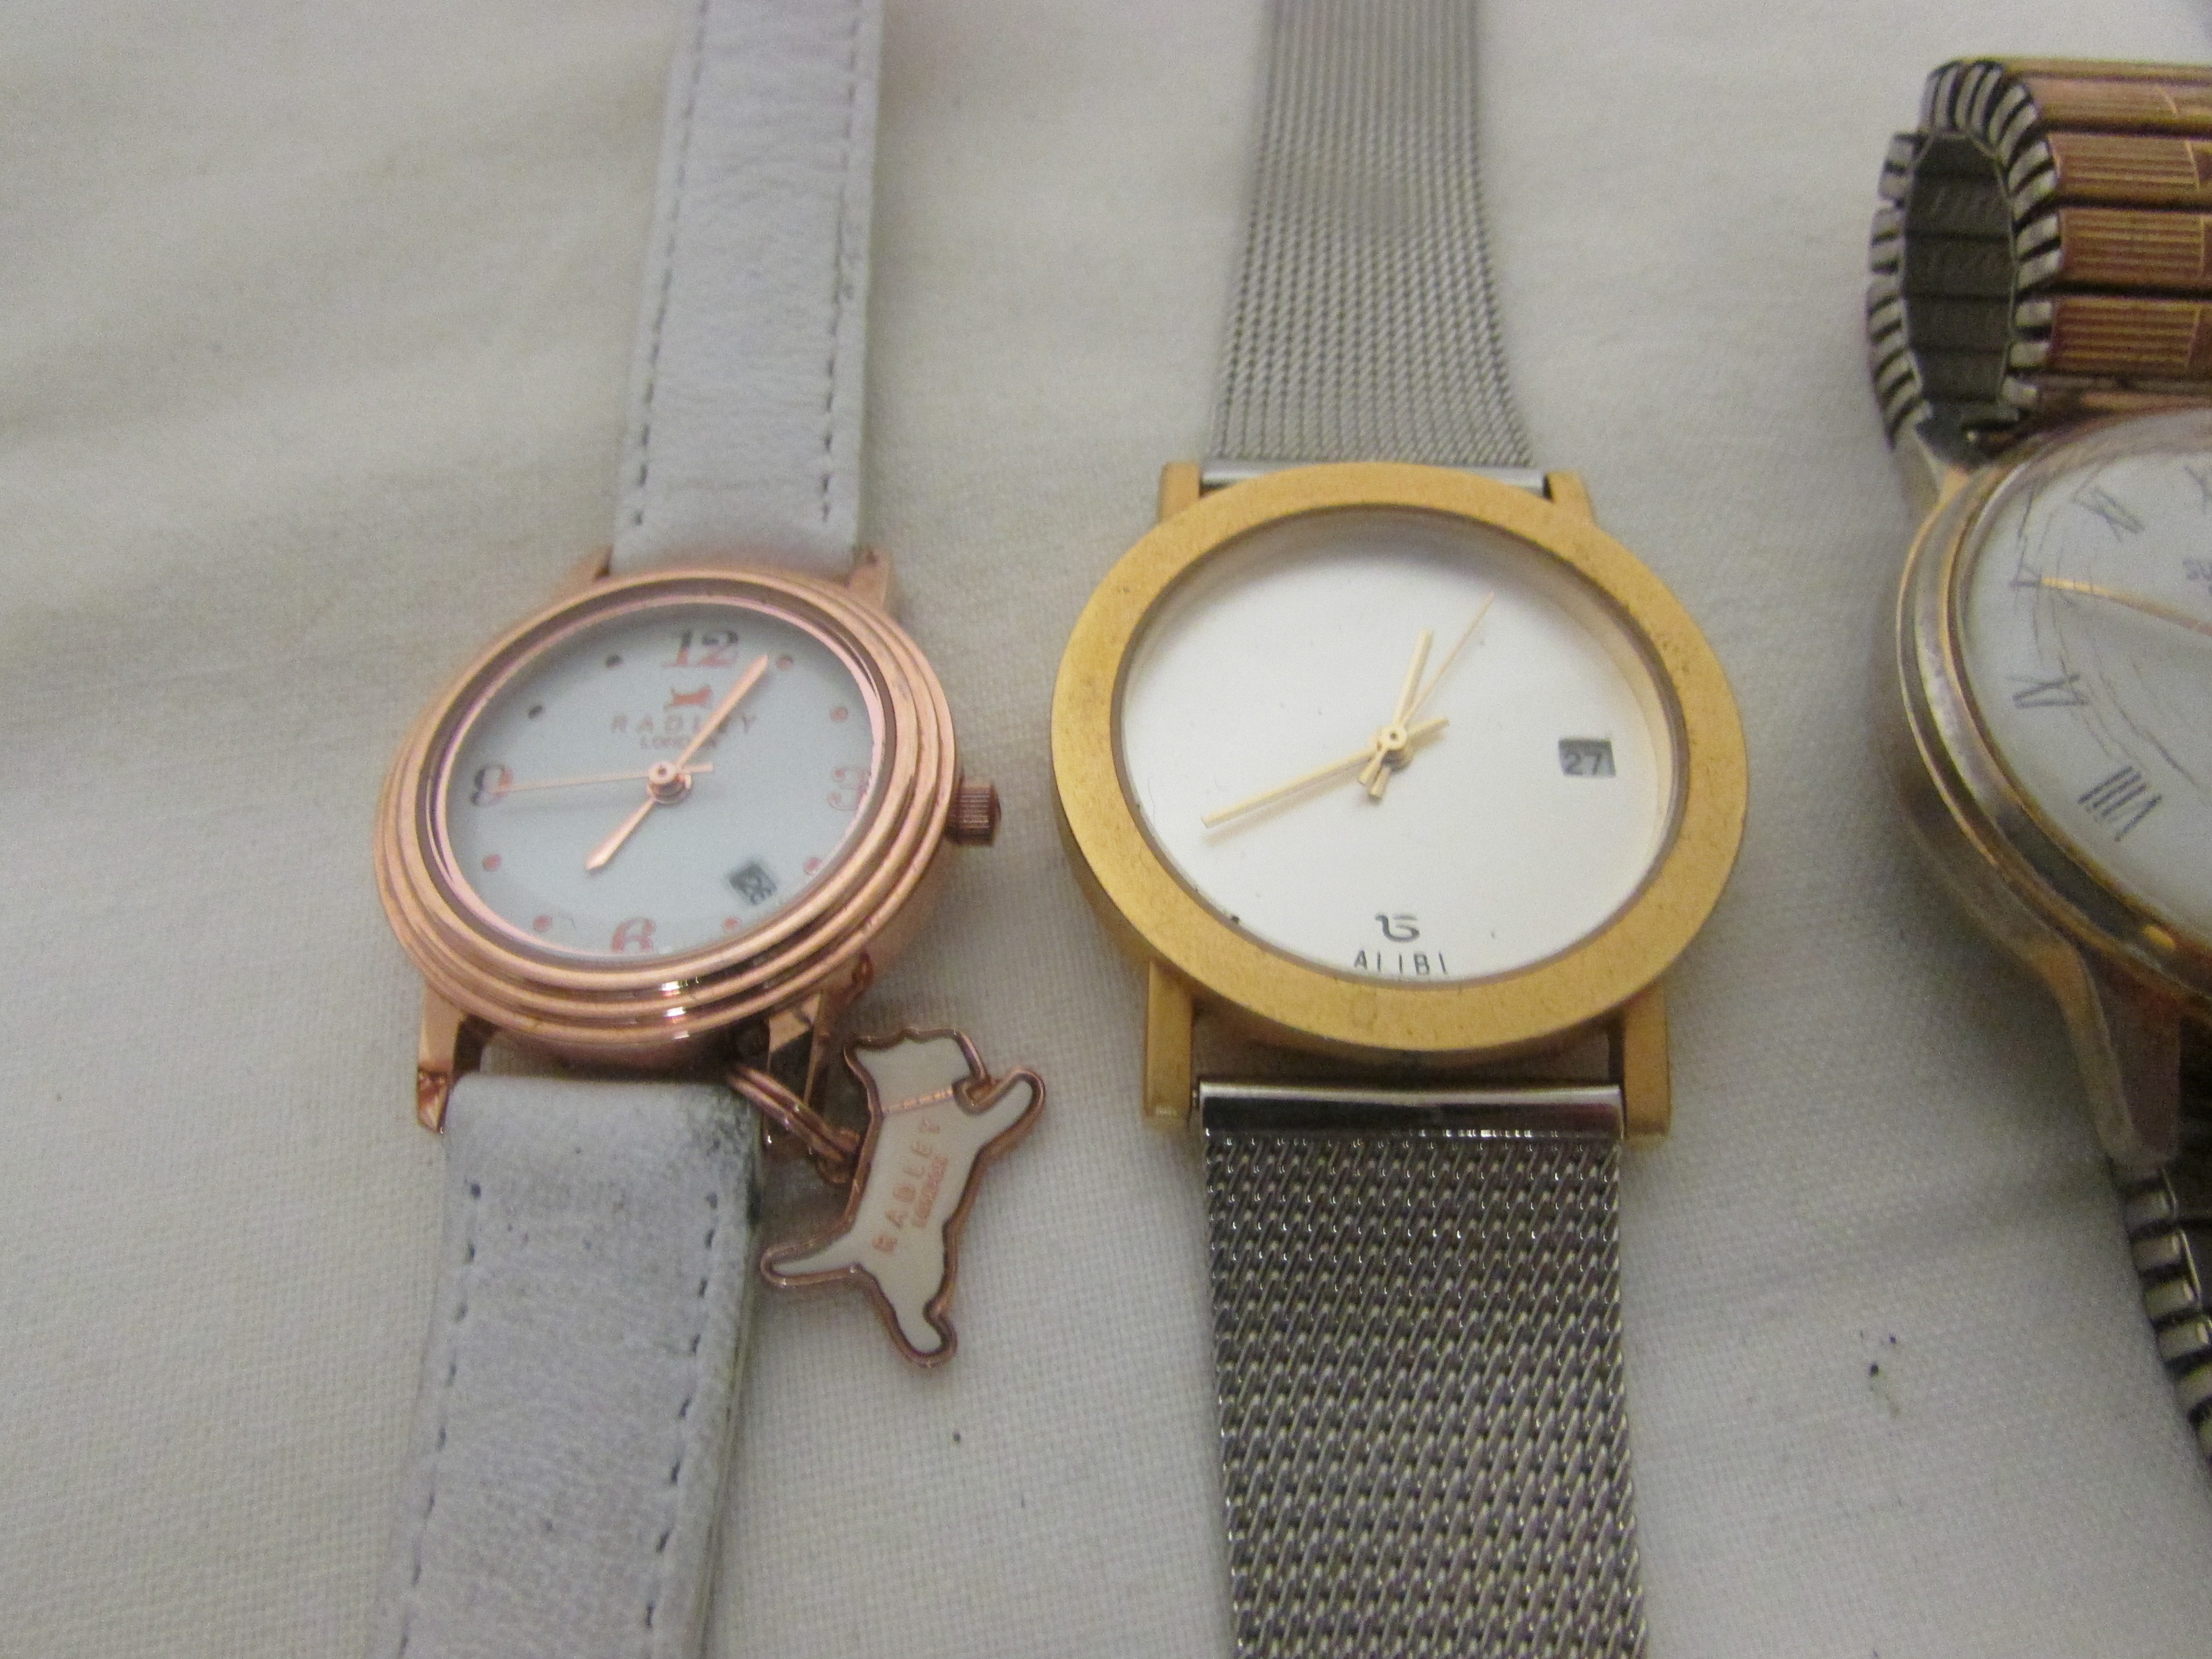 LADIES RADLEY WRISTWATCH, A TOCWATCH, AND TWO OTHER WRISTWATCHES - Image 2 of 3